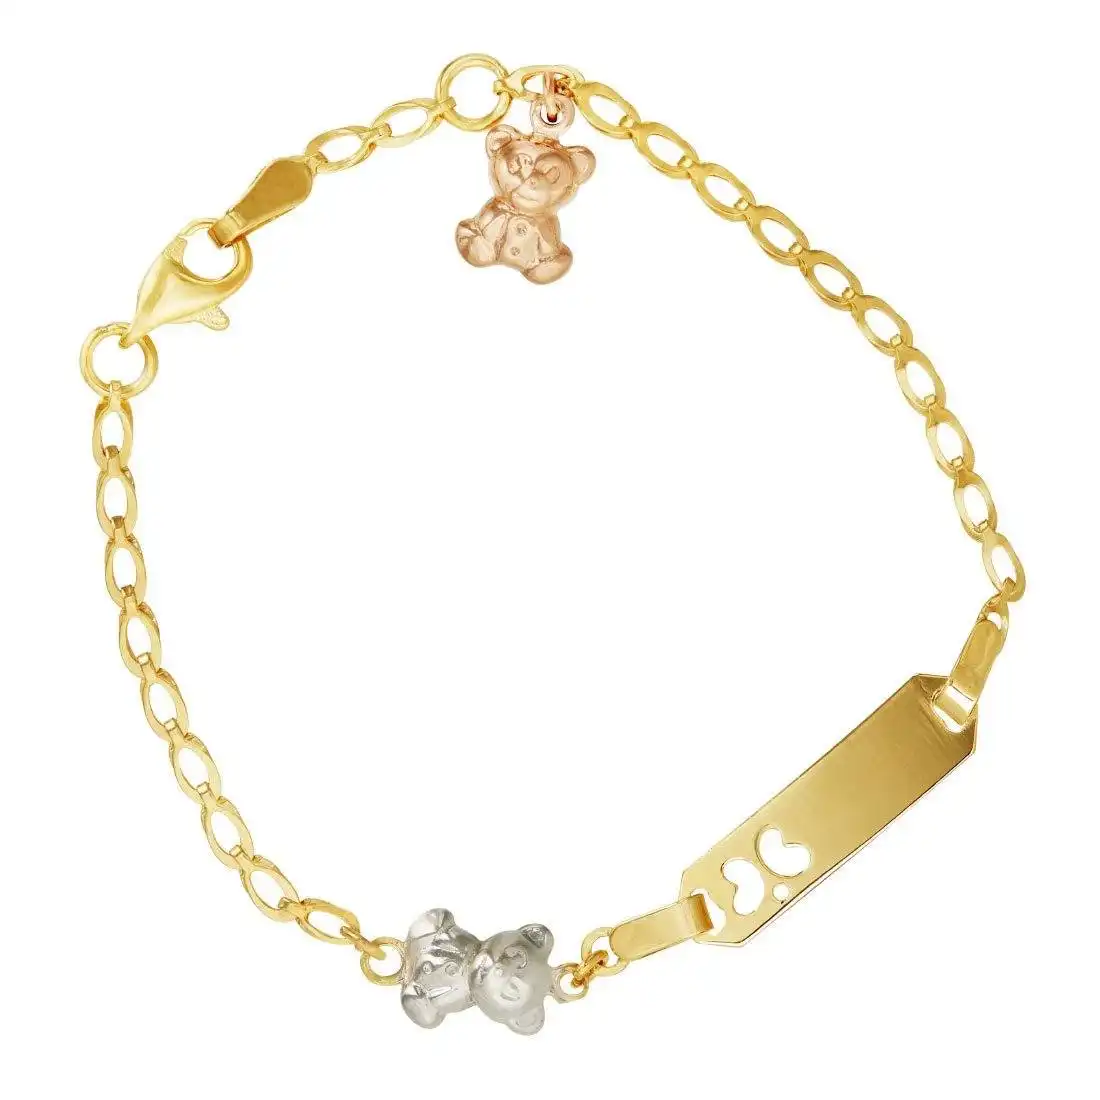 Children's Teddy Bear ID Bracelet in 9ct Gold Infusion